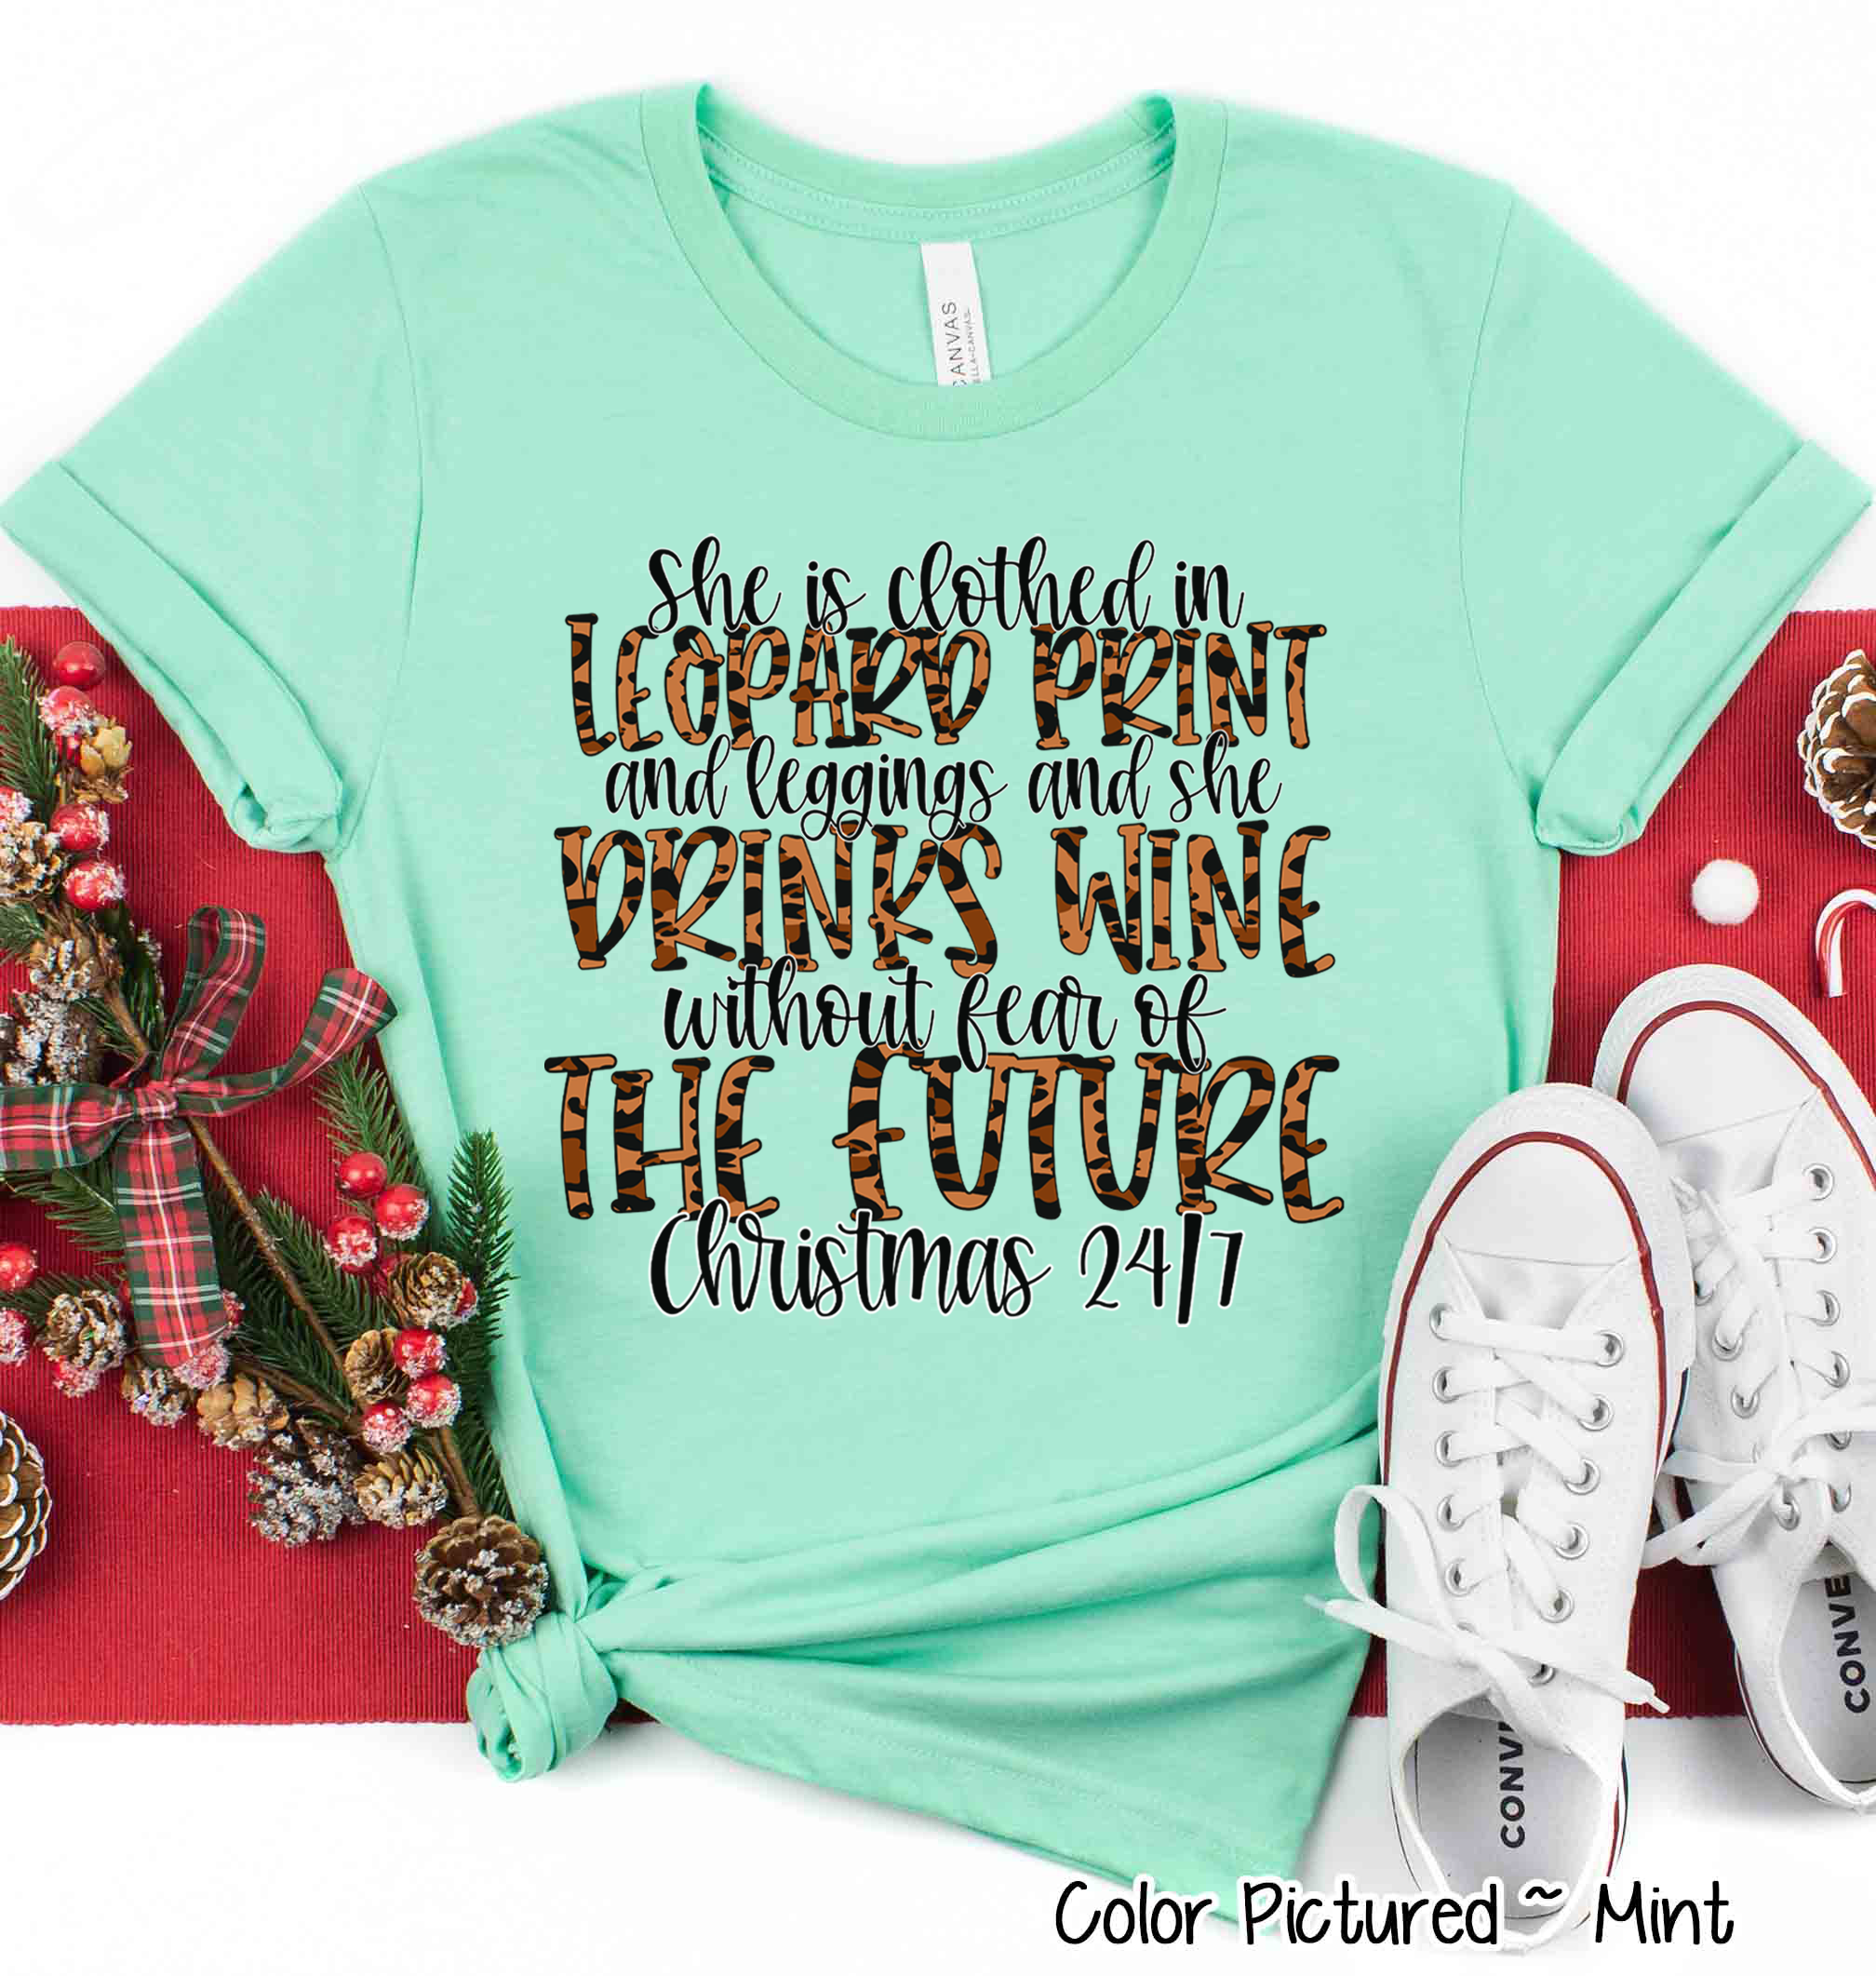 She is clothed in Leopard Print Christmas Movie Tee